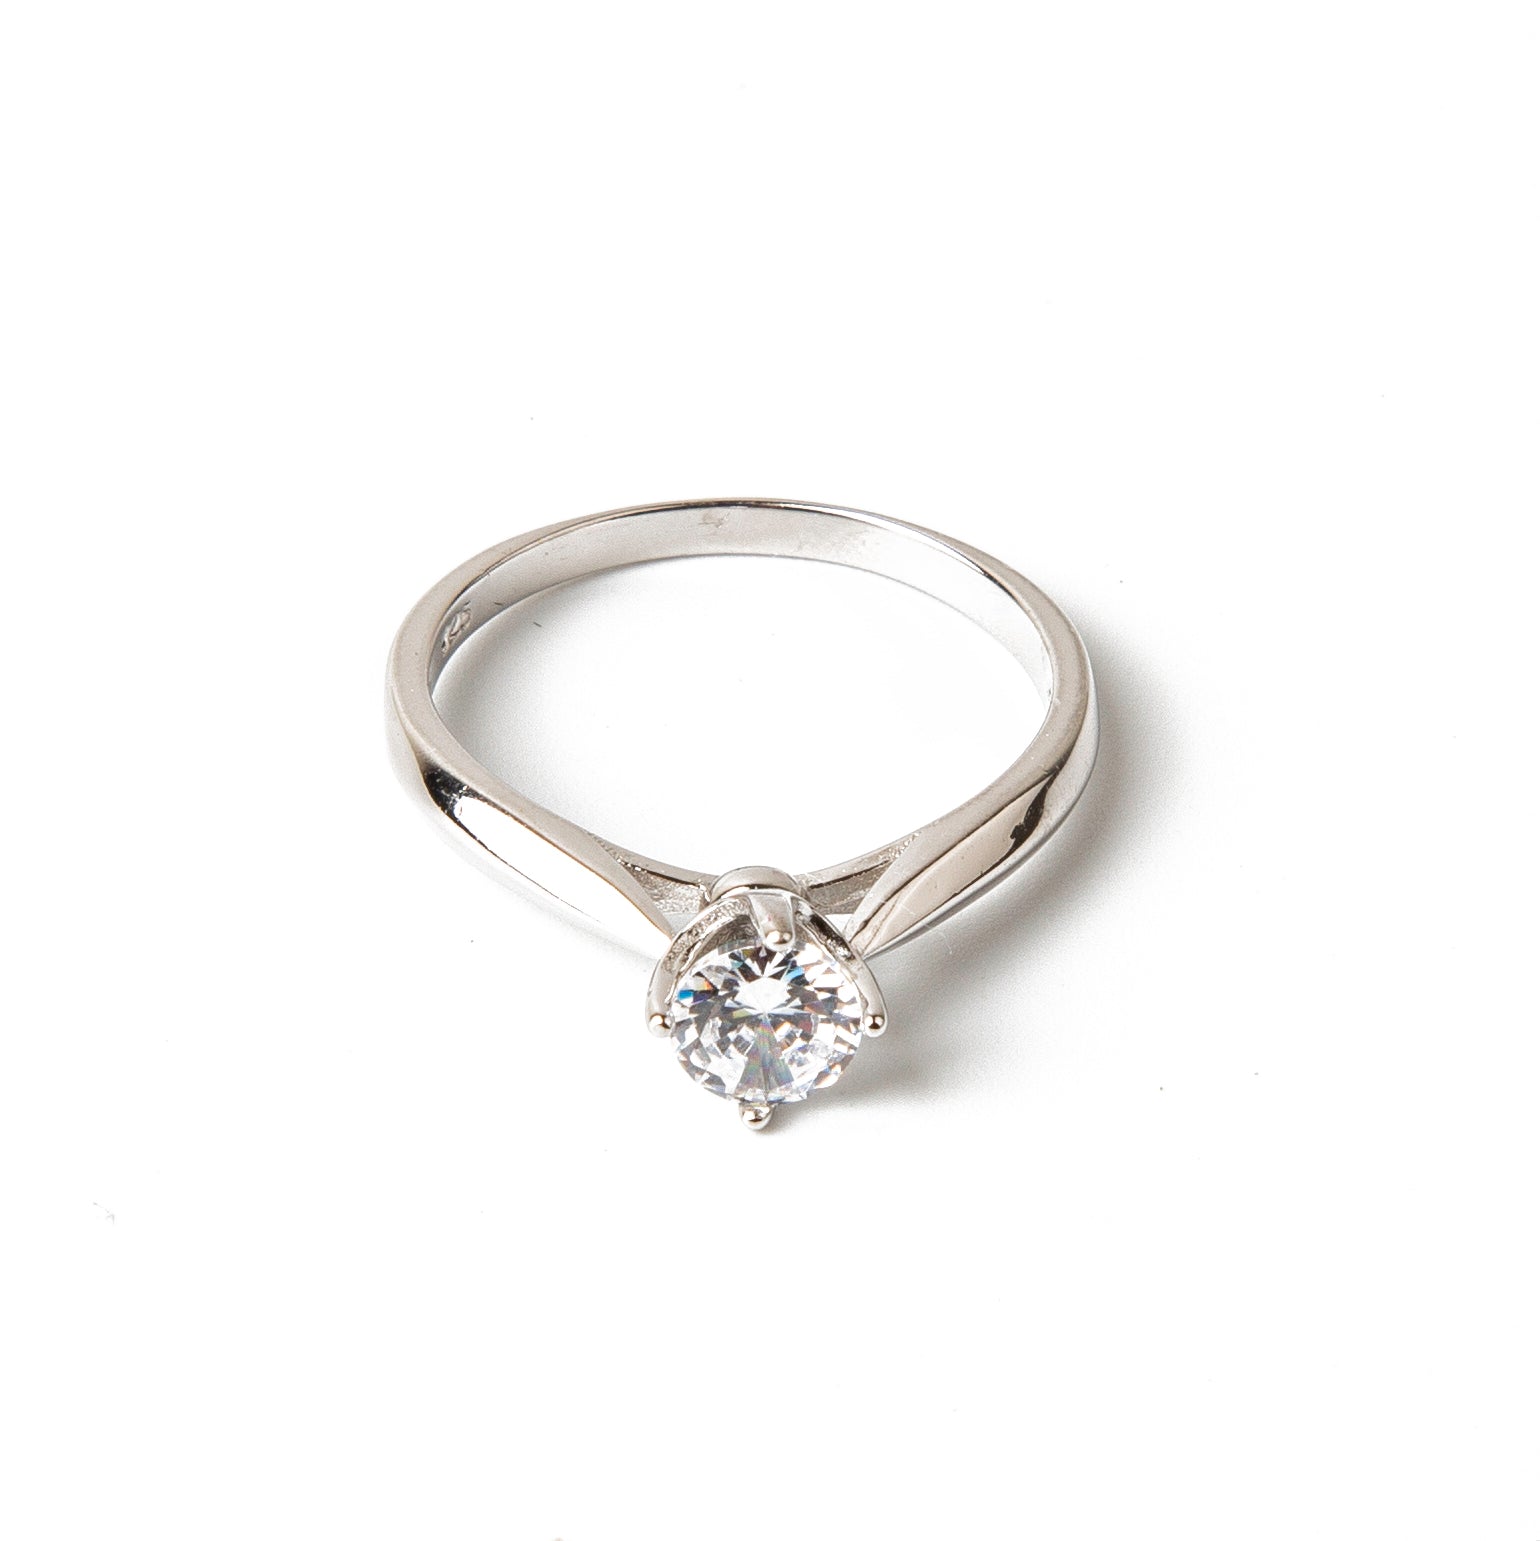 6mm Solitaire Ring with Ball Bridge